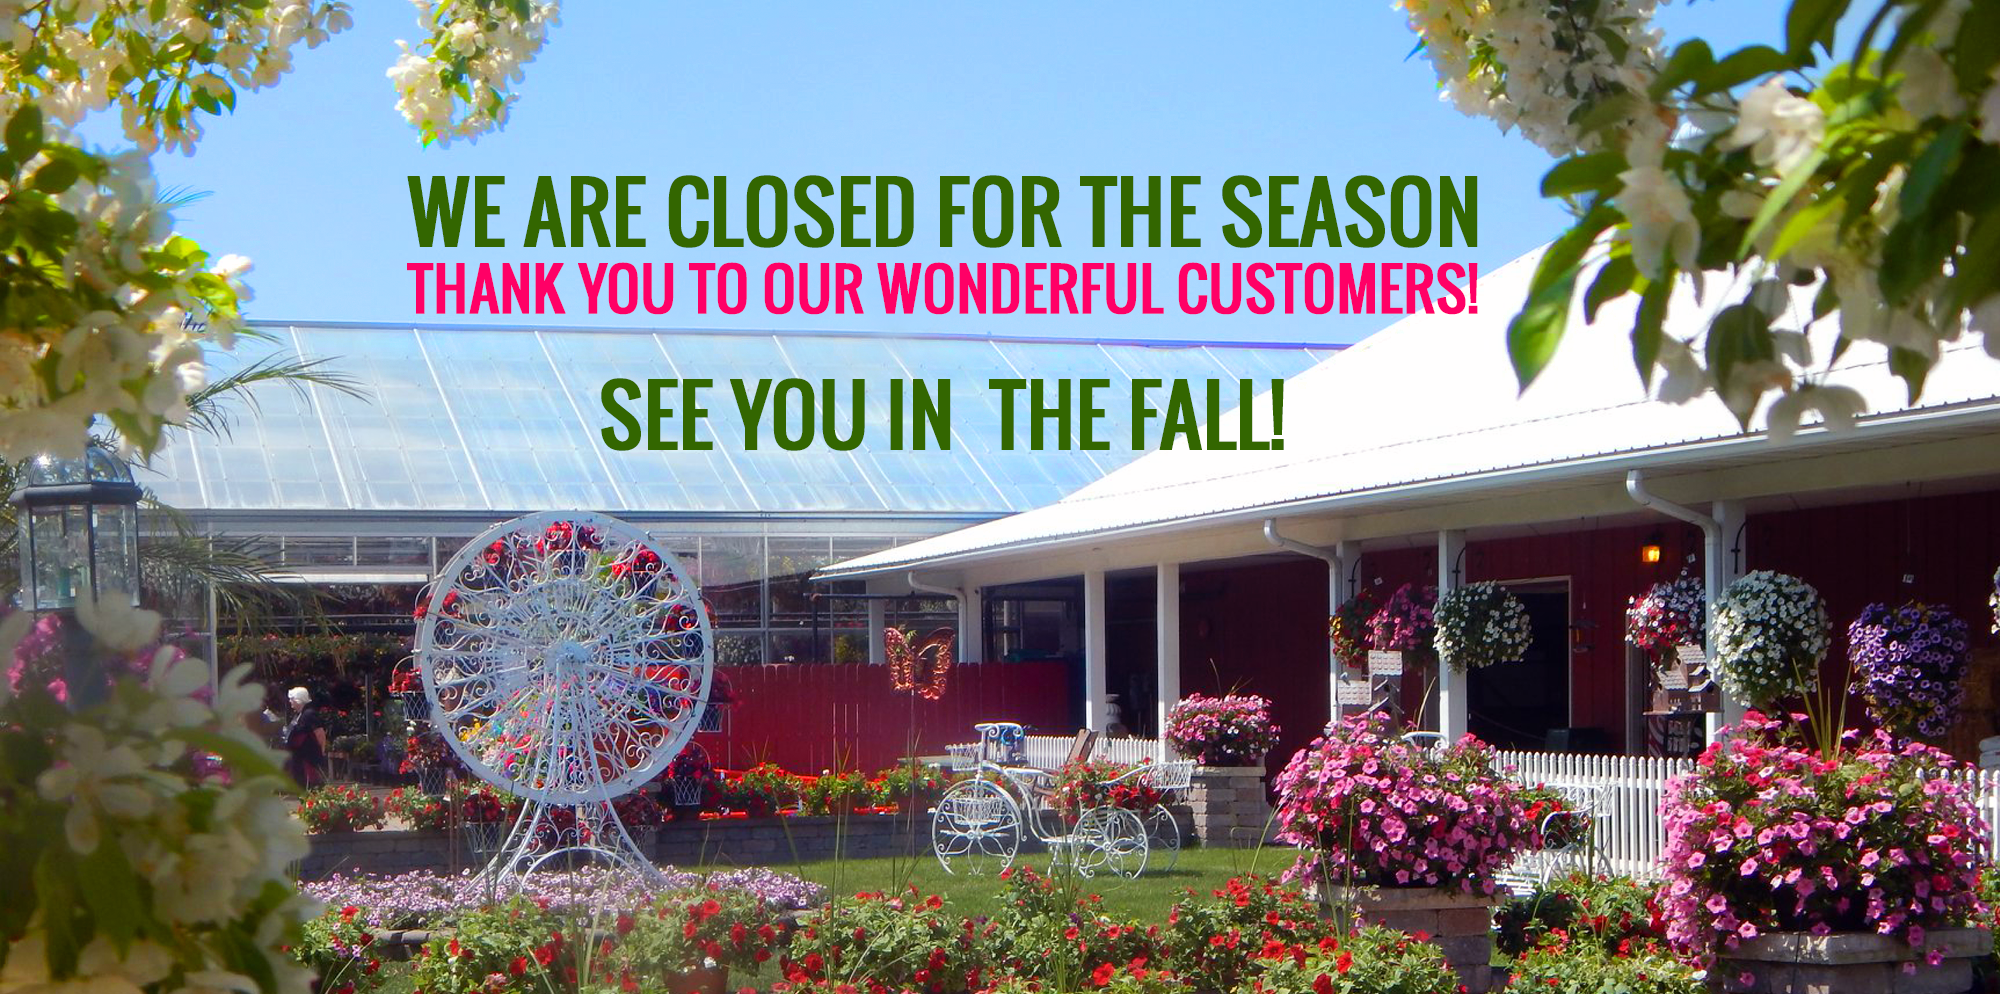 We are closed for the season! Thank you to all our customers! We'll see you in the fall! Johansen Farms